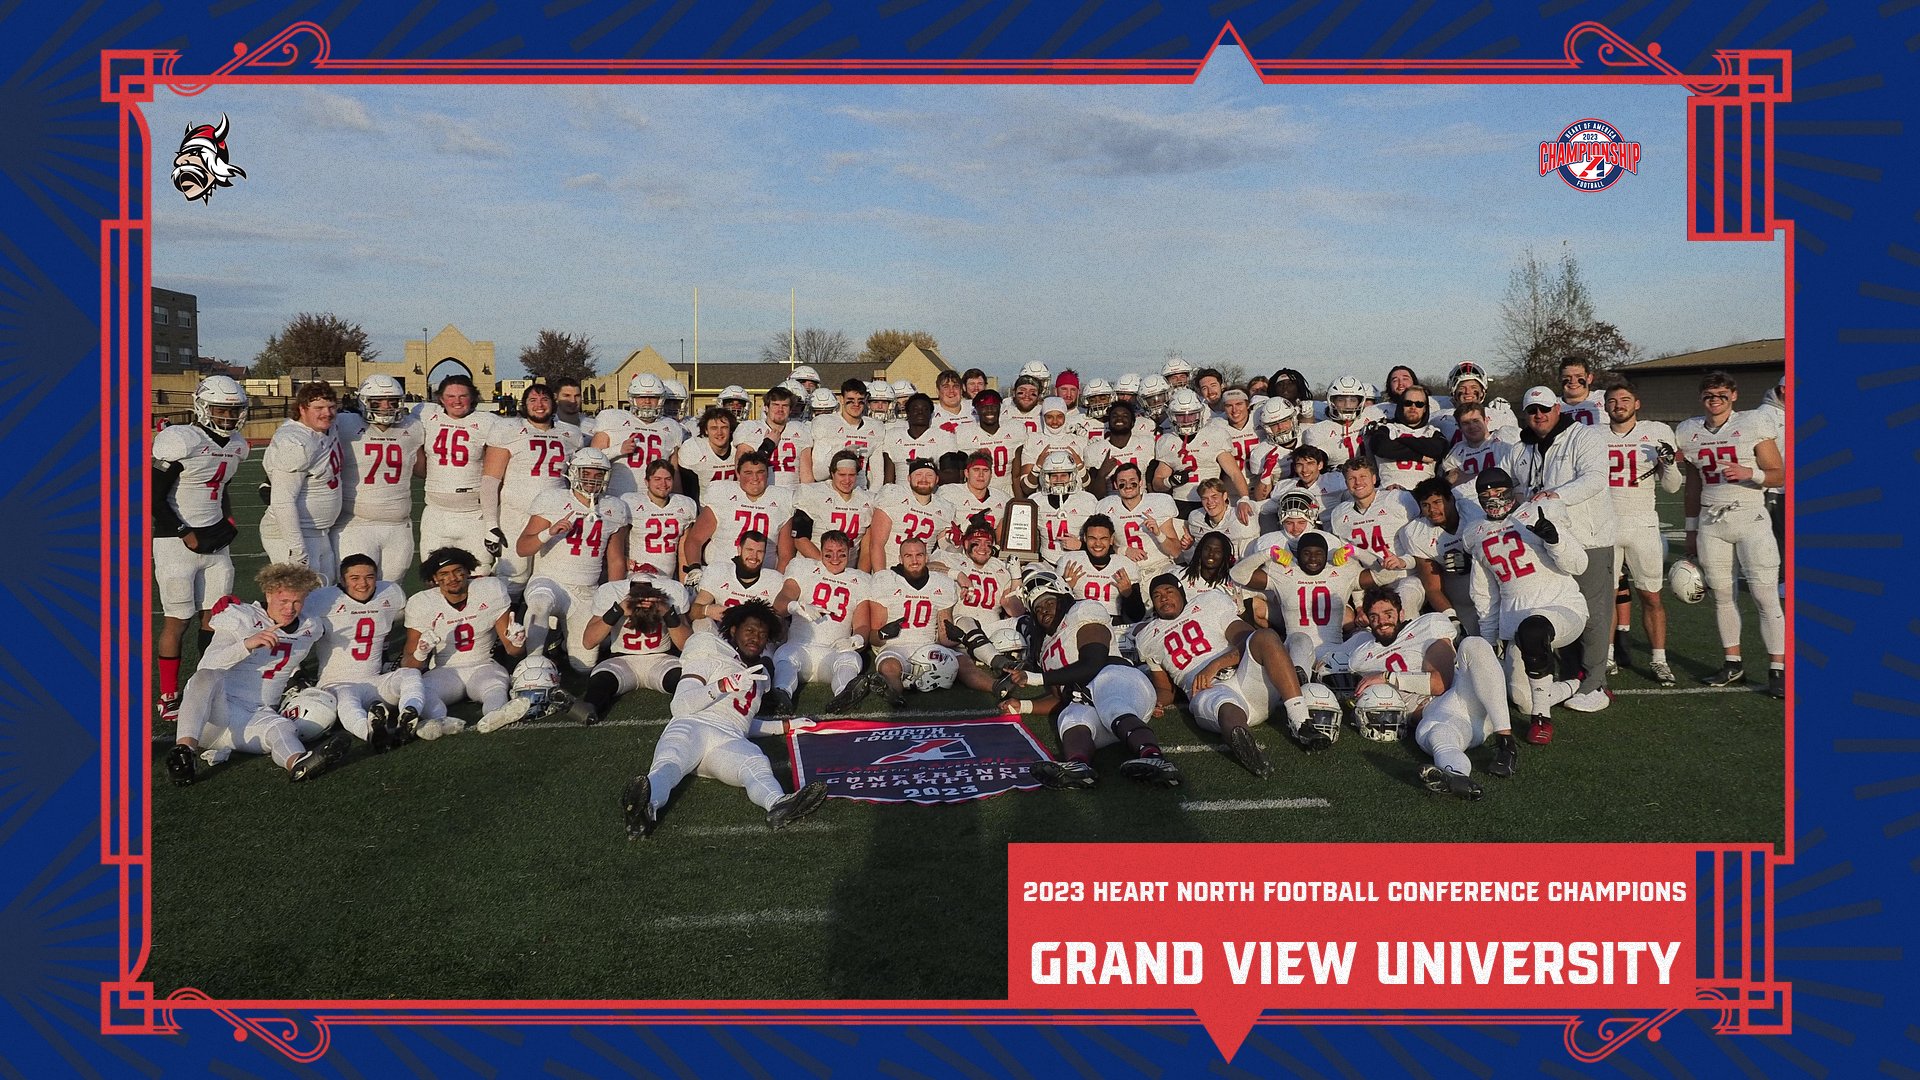 Grand View Wins Fifth-Straight Heart North Title, BU, BC & MNU Share Heart South Title